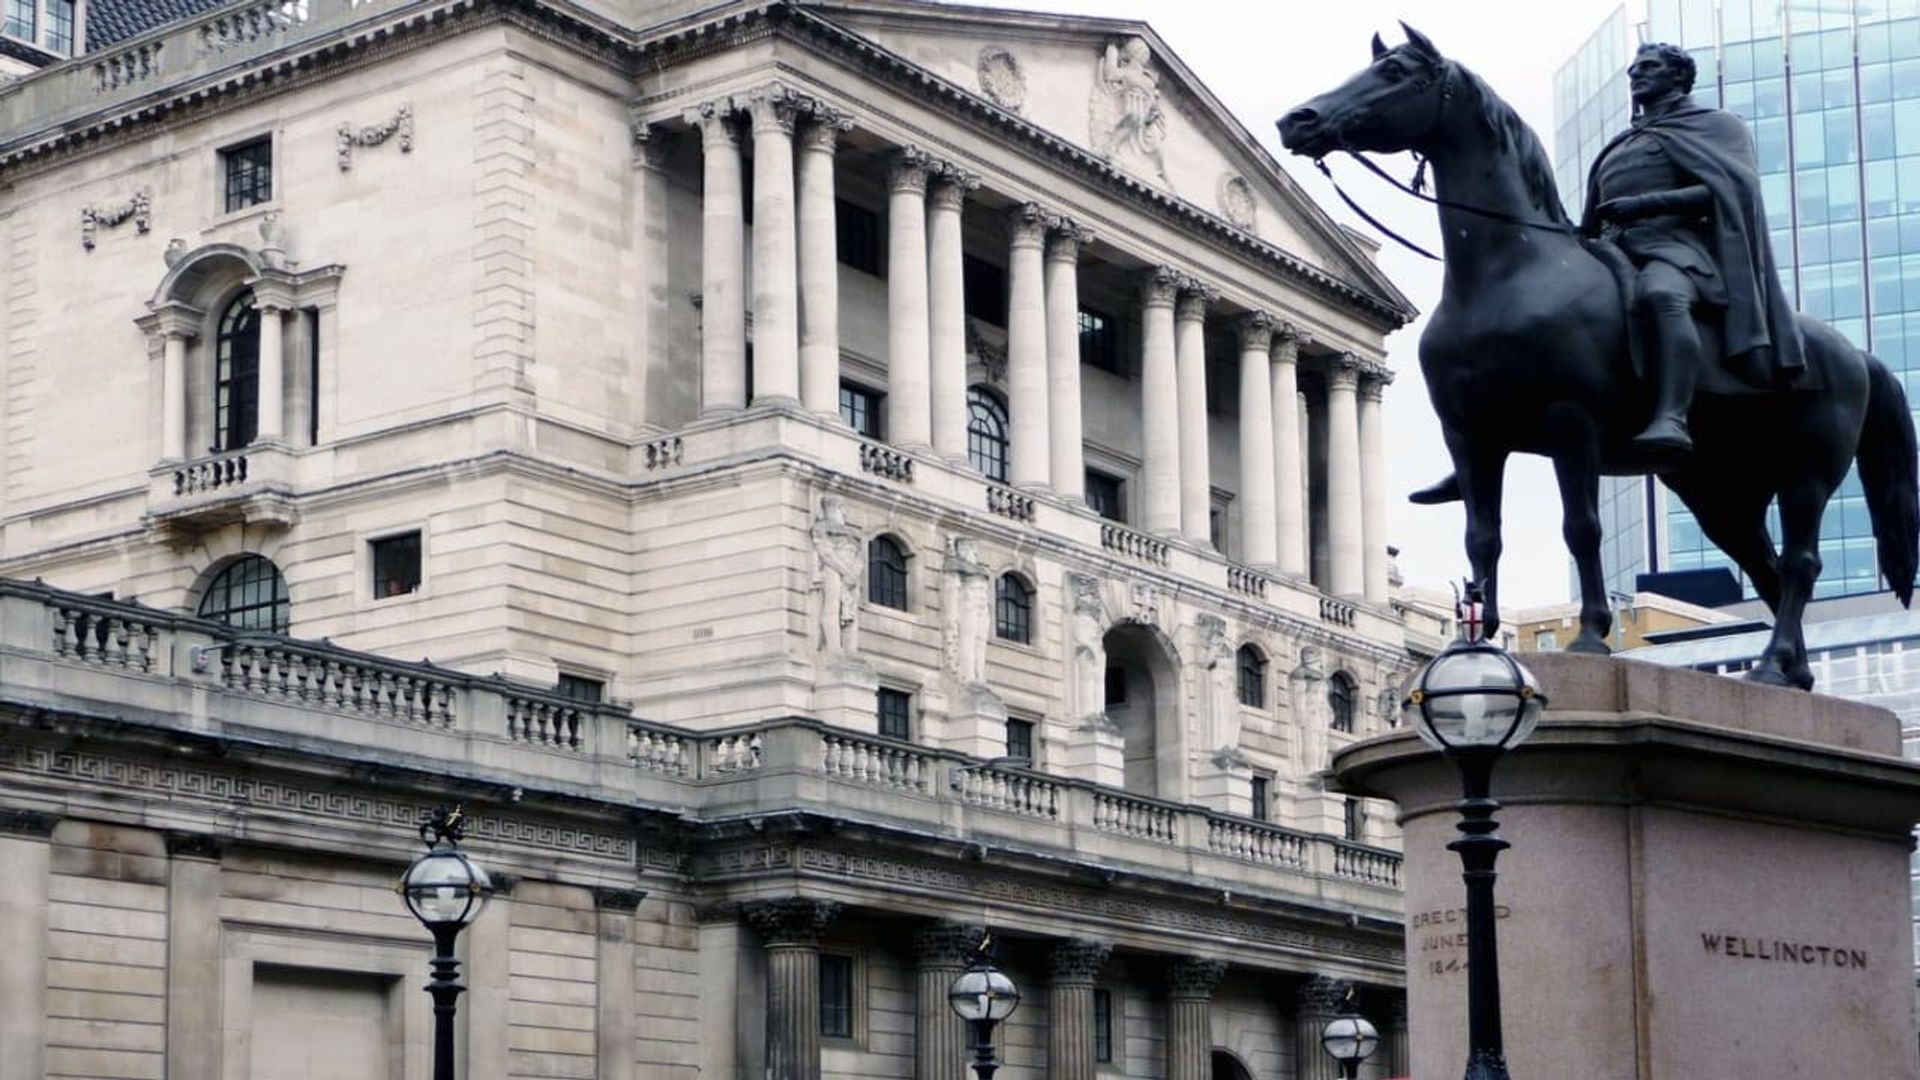 Inside the Bank of England background